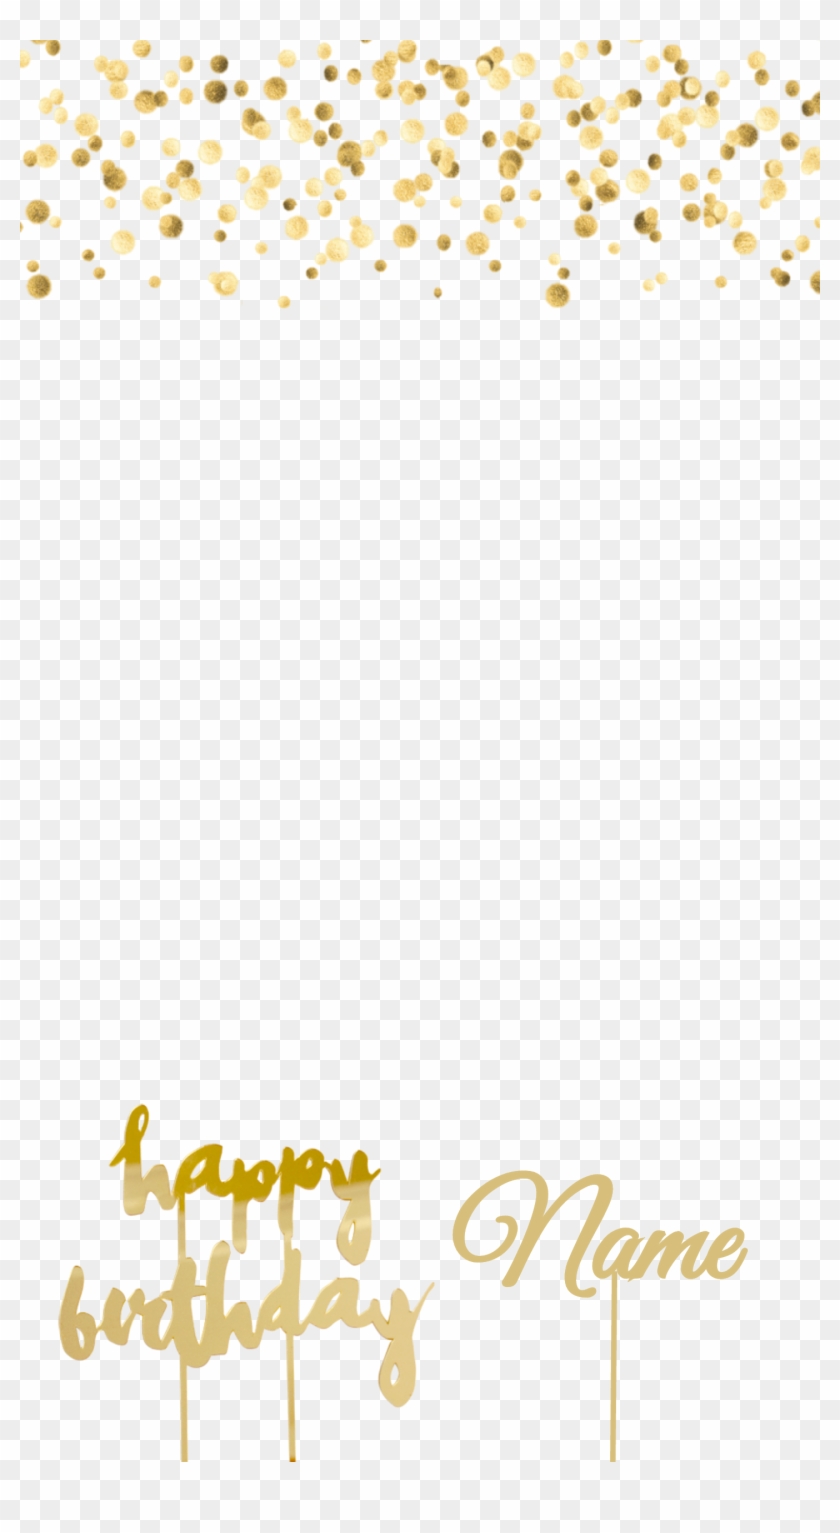 Click To Customize - Transparent Gold Confetti Background Clipart #897213